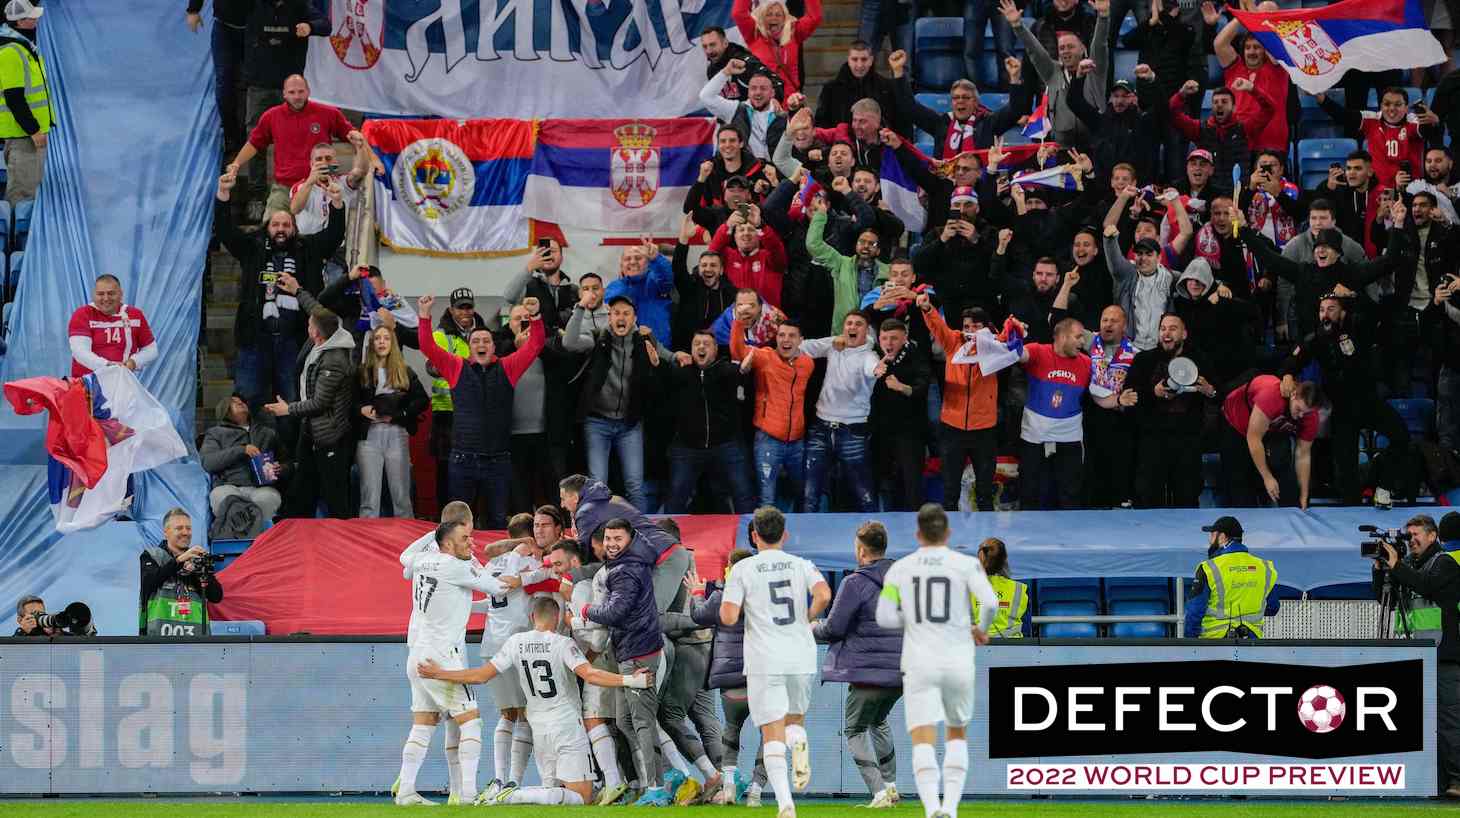 Serbia's players cheer in front of their supporters after Serbia's forward Aleksandar Mitrovic scored 0-2 during the UEFA Nations League Group 4 between Norway and Serbia in Oslo on September 27, 2022.